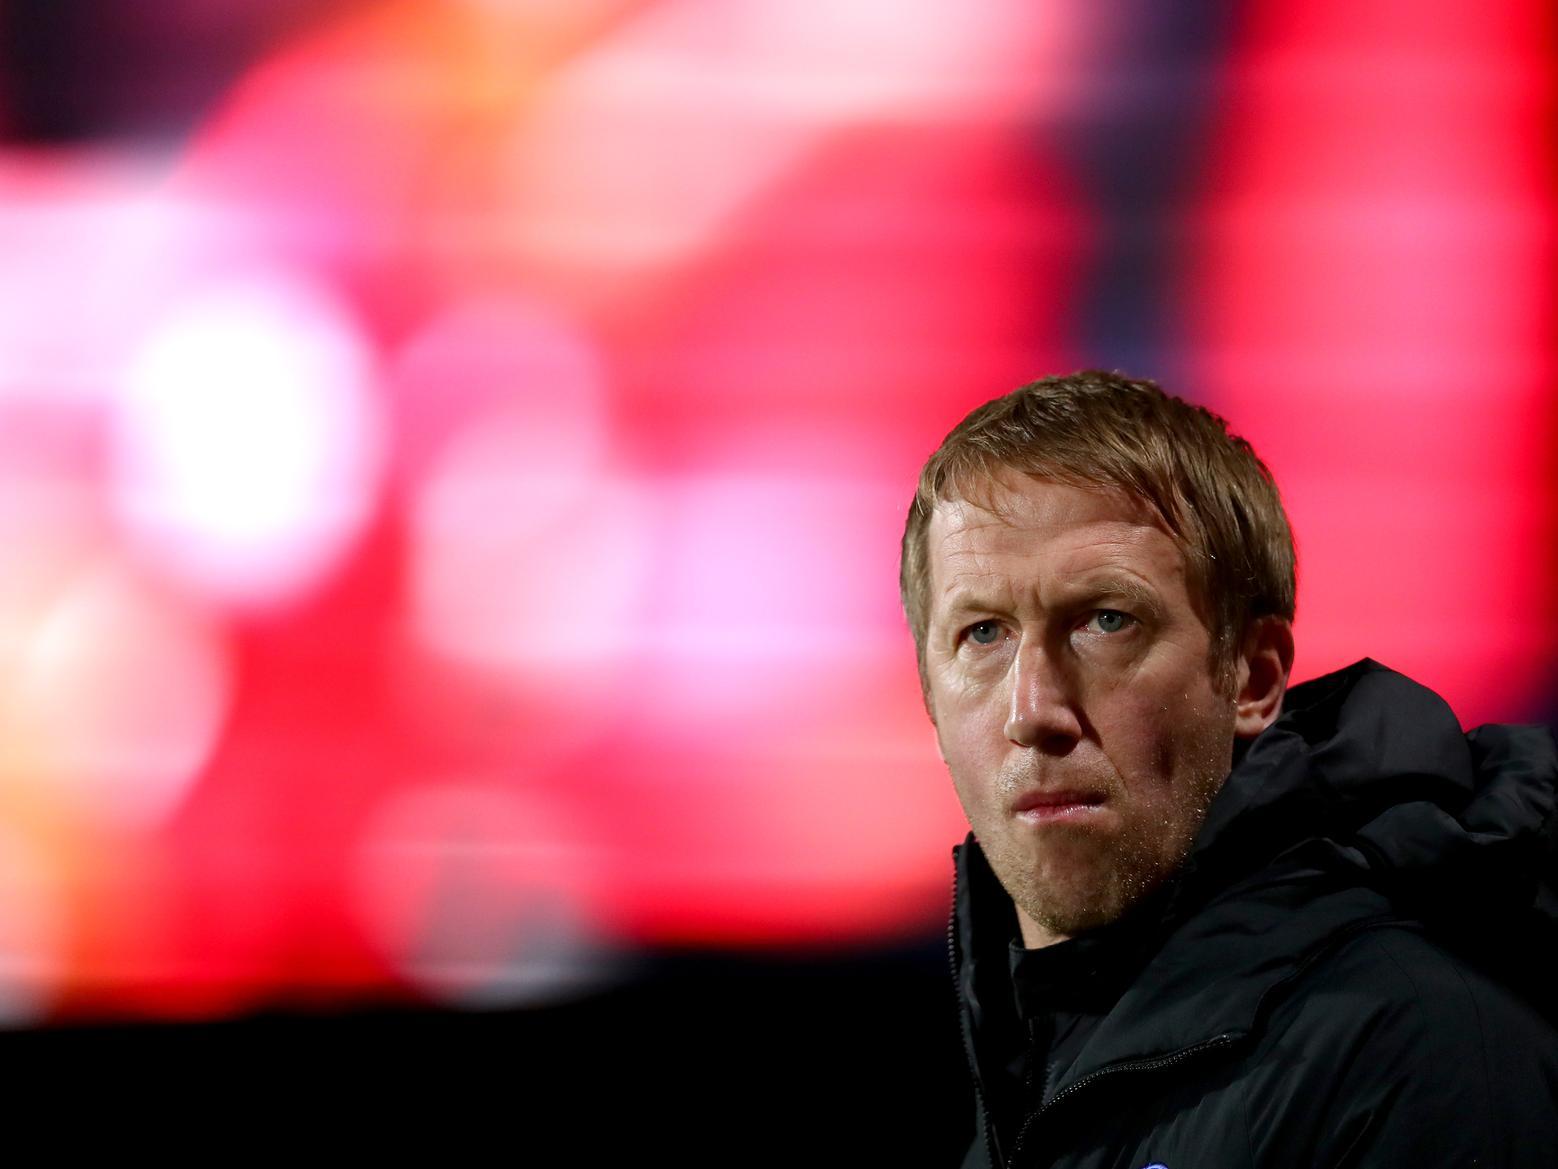 Brighton and Hove Albion head coach Graham Potter will take his squad to the Premier League's surprise package Sheffield United this Saturday